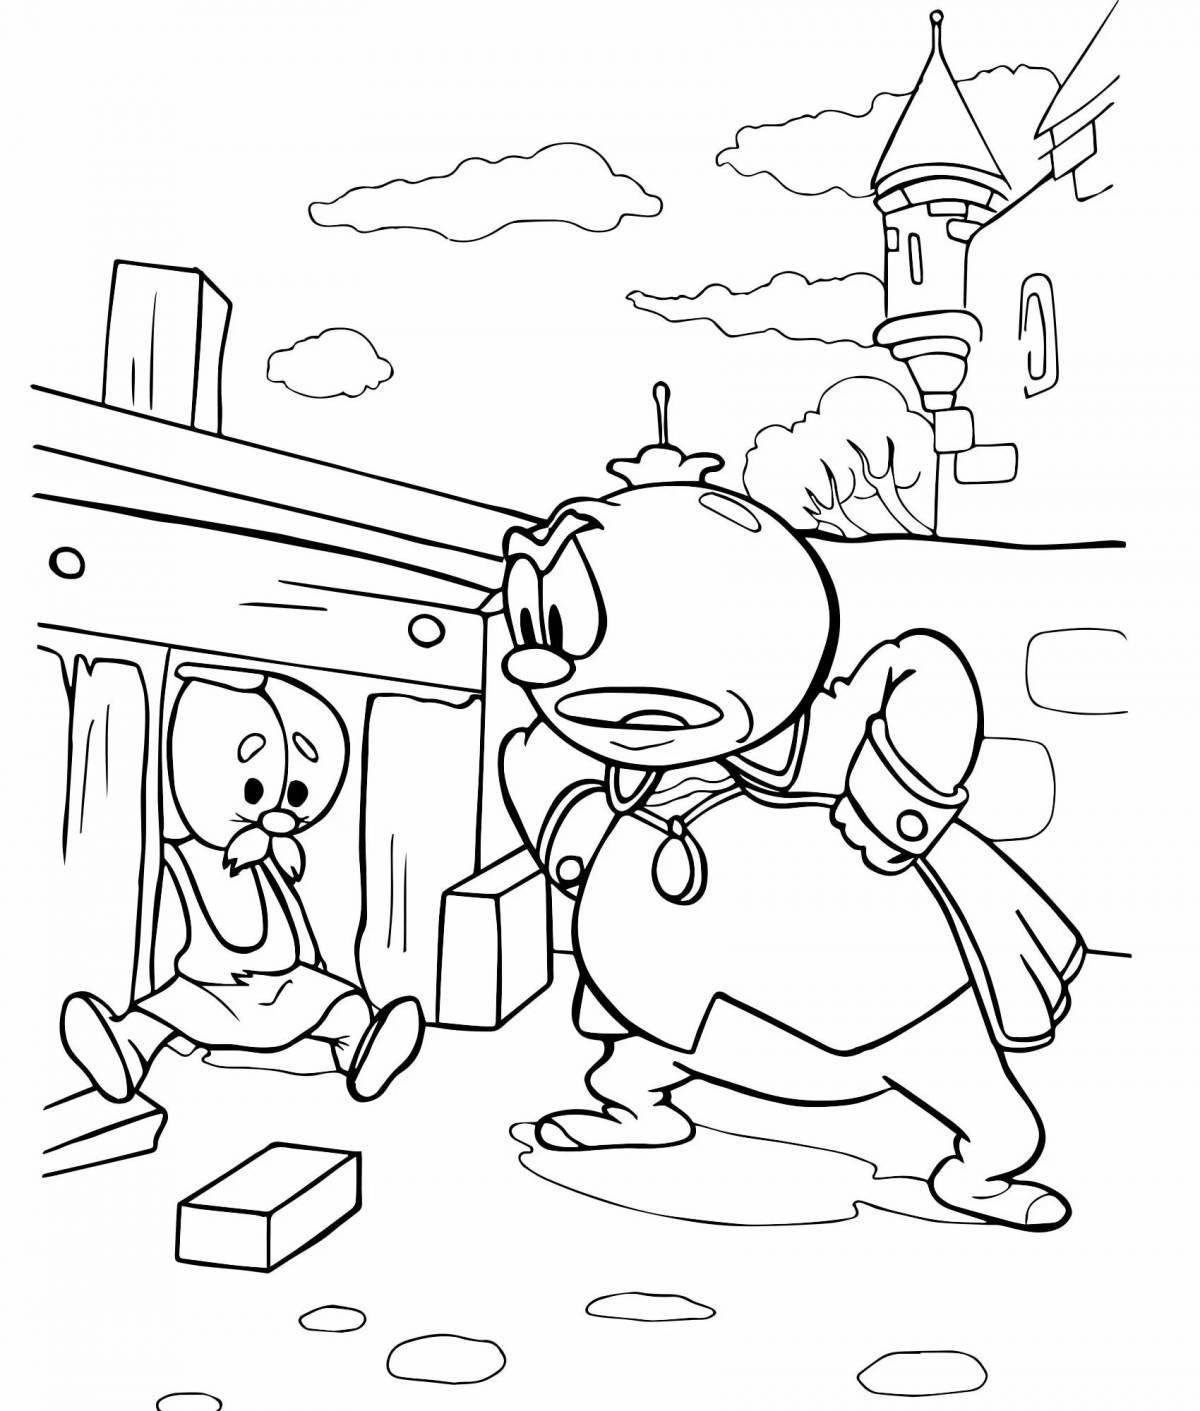 Children's chipollino coloring pages for kids